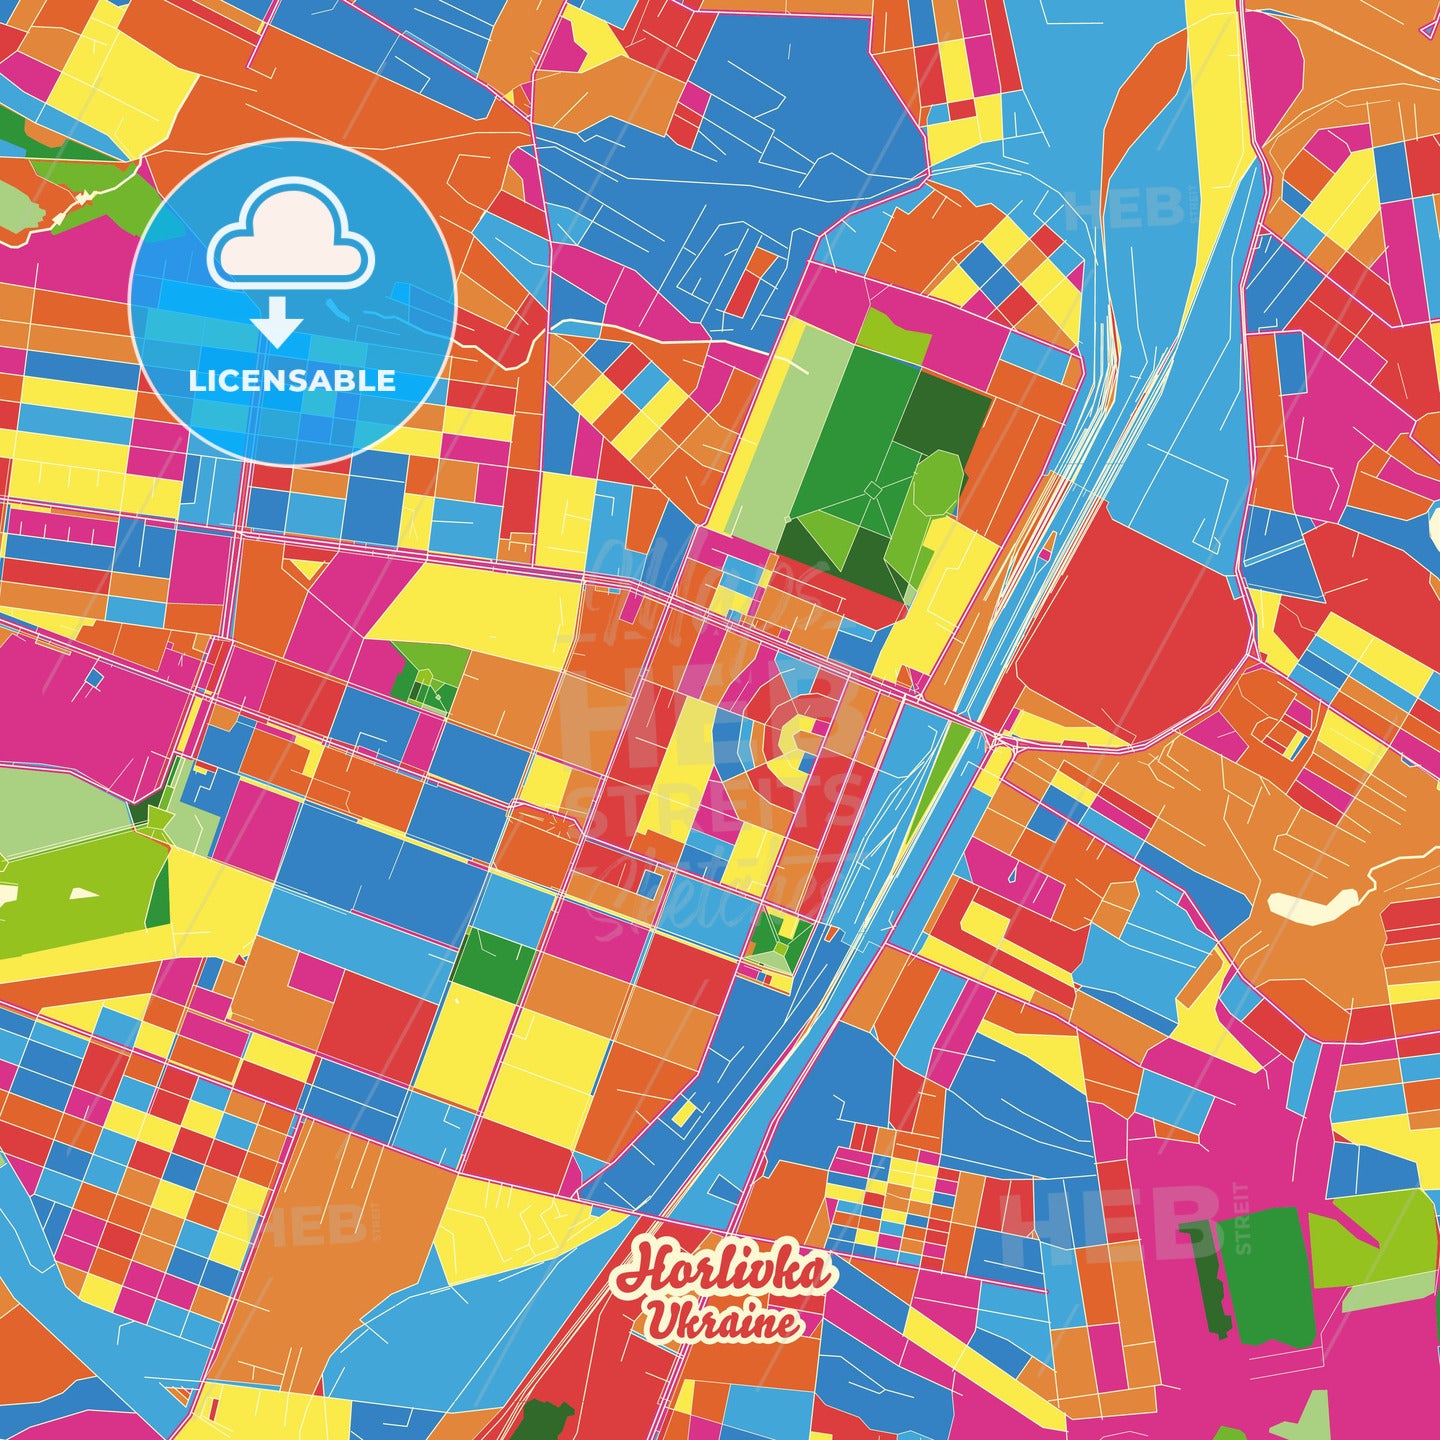 Horlivka, Ukraine Crazy Colorful Street Map Poster Template - HEBSTREITS Sketches